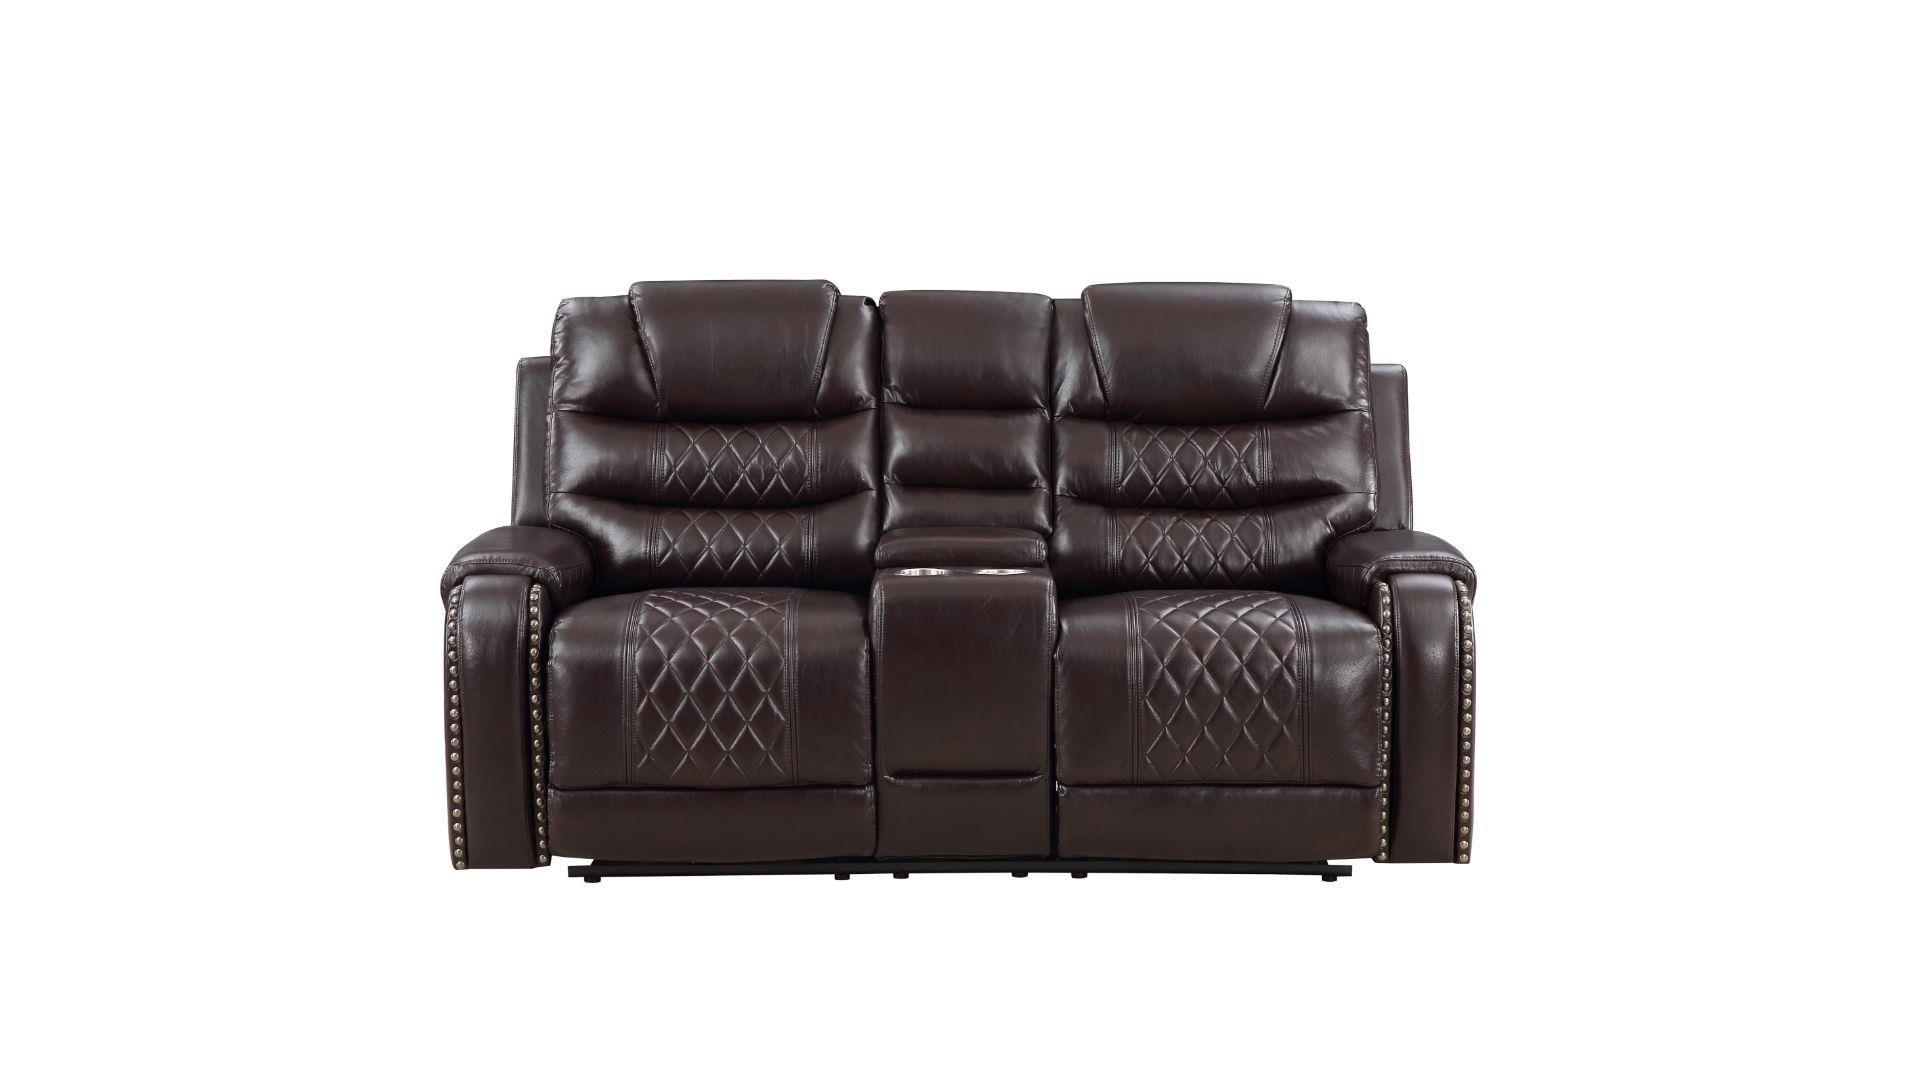 Galaxy Home Furniture TENNESSEE-BR Recliner Loveseat